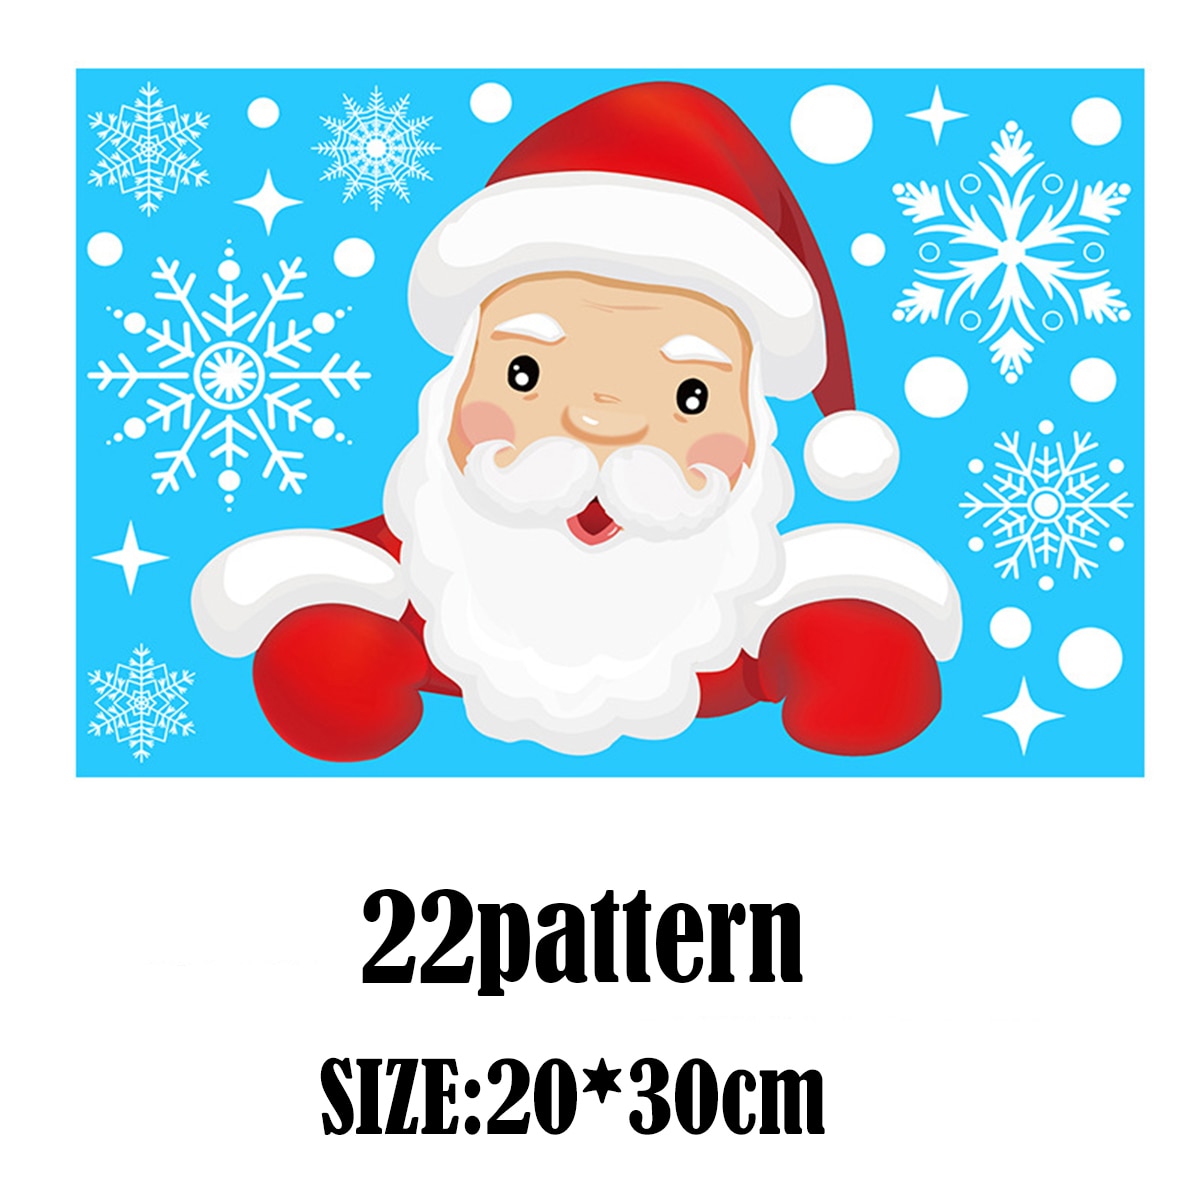 Qfdian Christmas decor ideas christmas decorations  Christmas Santa Claus Window Stickers Wall Ornaments Christmas Pendant Merry Christmas For Home Decor New Year Stickers 2022